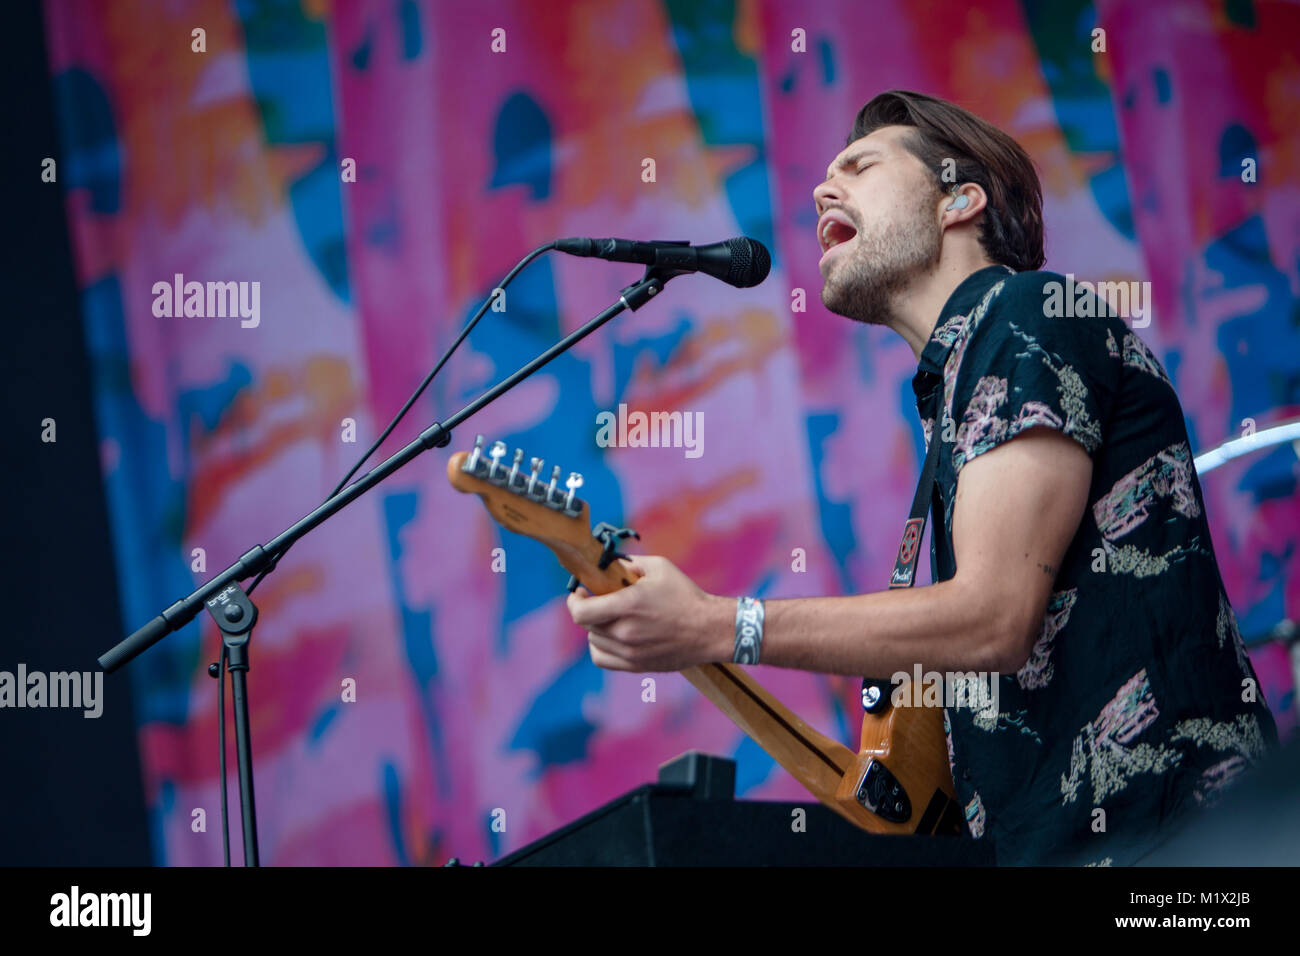 Norway, Bergen – June 17, 2017. The English indie pop duo Oh Wonder performs a live concert during the Norwegian music festival Bergenfest 2017 in Bergen. Here singer and musician Anthony West is seen live on stage. Stock Photo